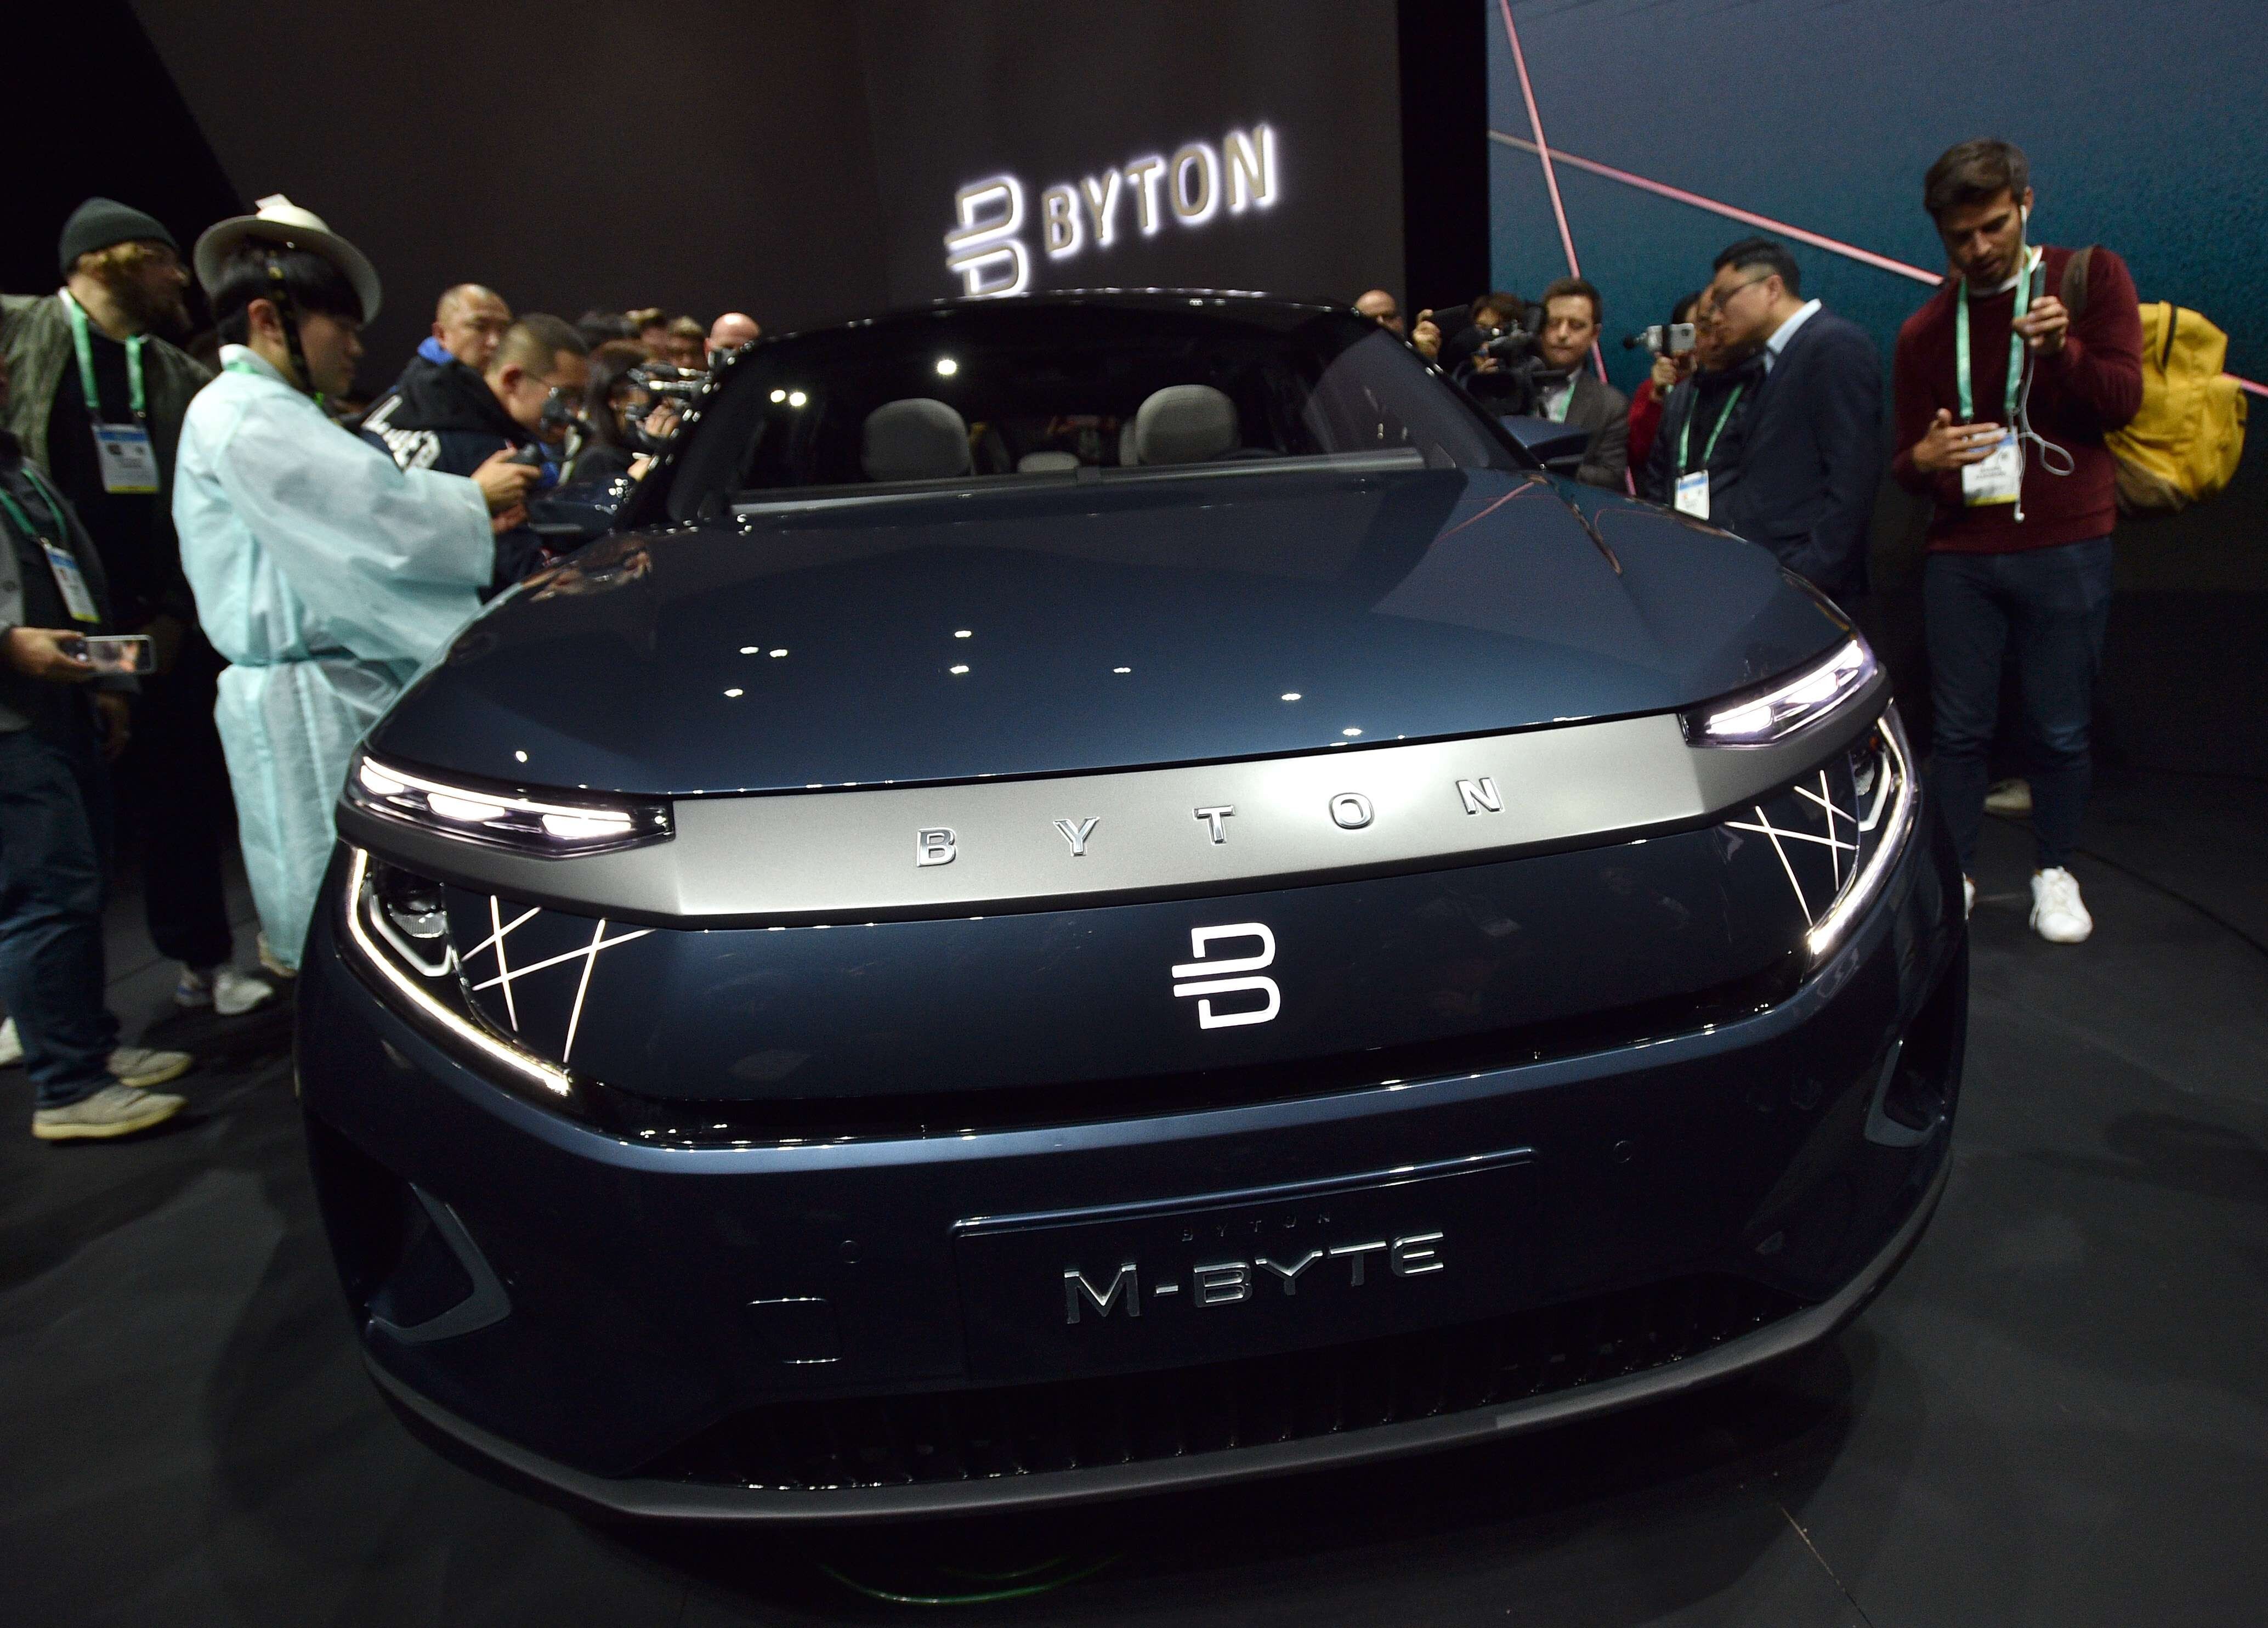 Members of media surround Byton’s M-Byte electric vehicle after it was unveiled at a press event on the sidelines of the CES 2020 trade show, held at the Mandalay Bay Convention Centre on January 5 in Las Vegas, Nevada. Photo: Agence France-Presse